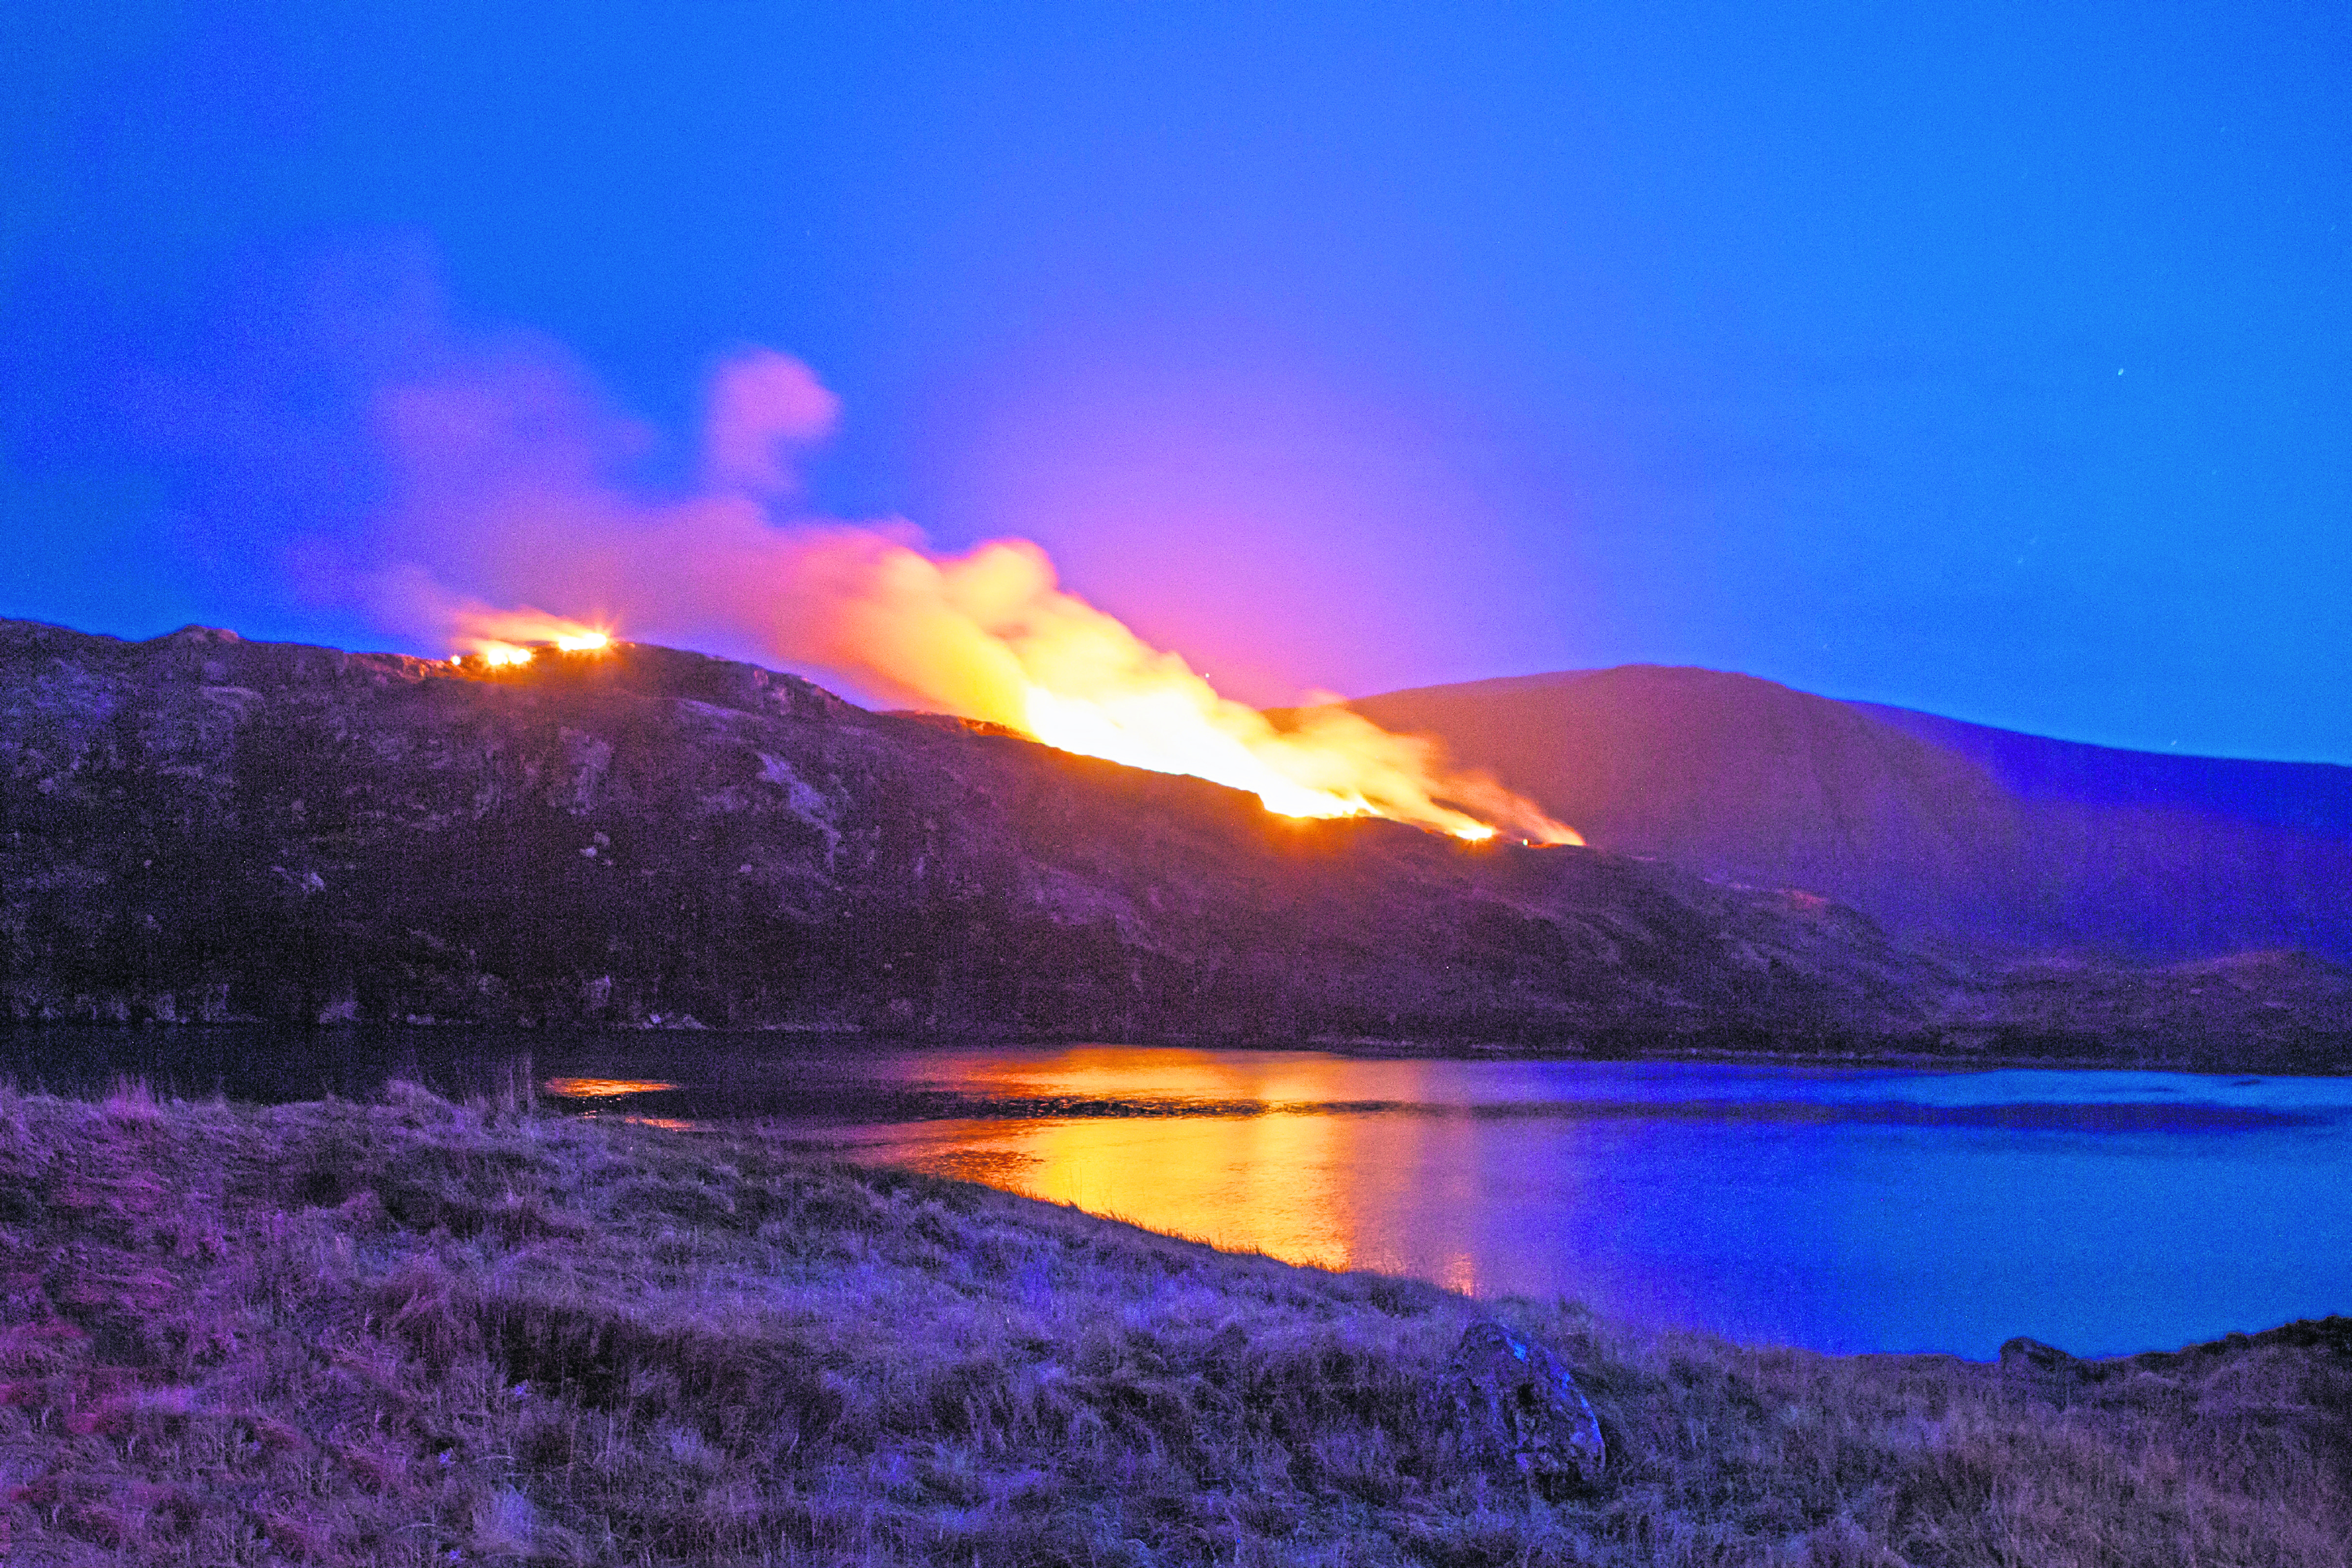 The view from Ardhasaig, north of Tarbert. The fires continued along the hill range past Tarbert to Direcleit.